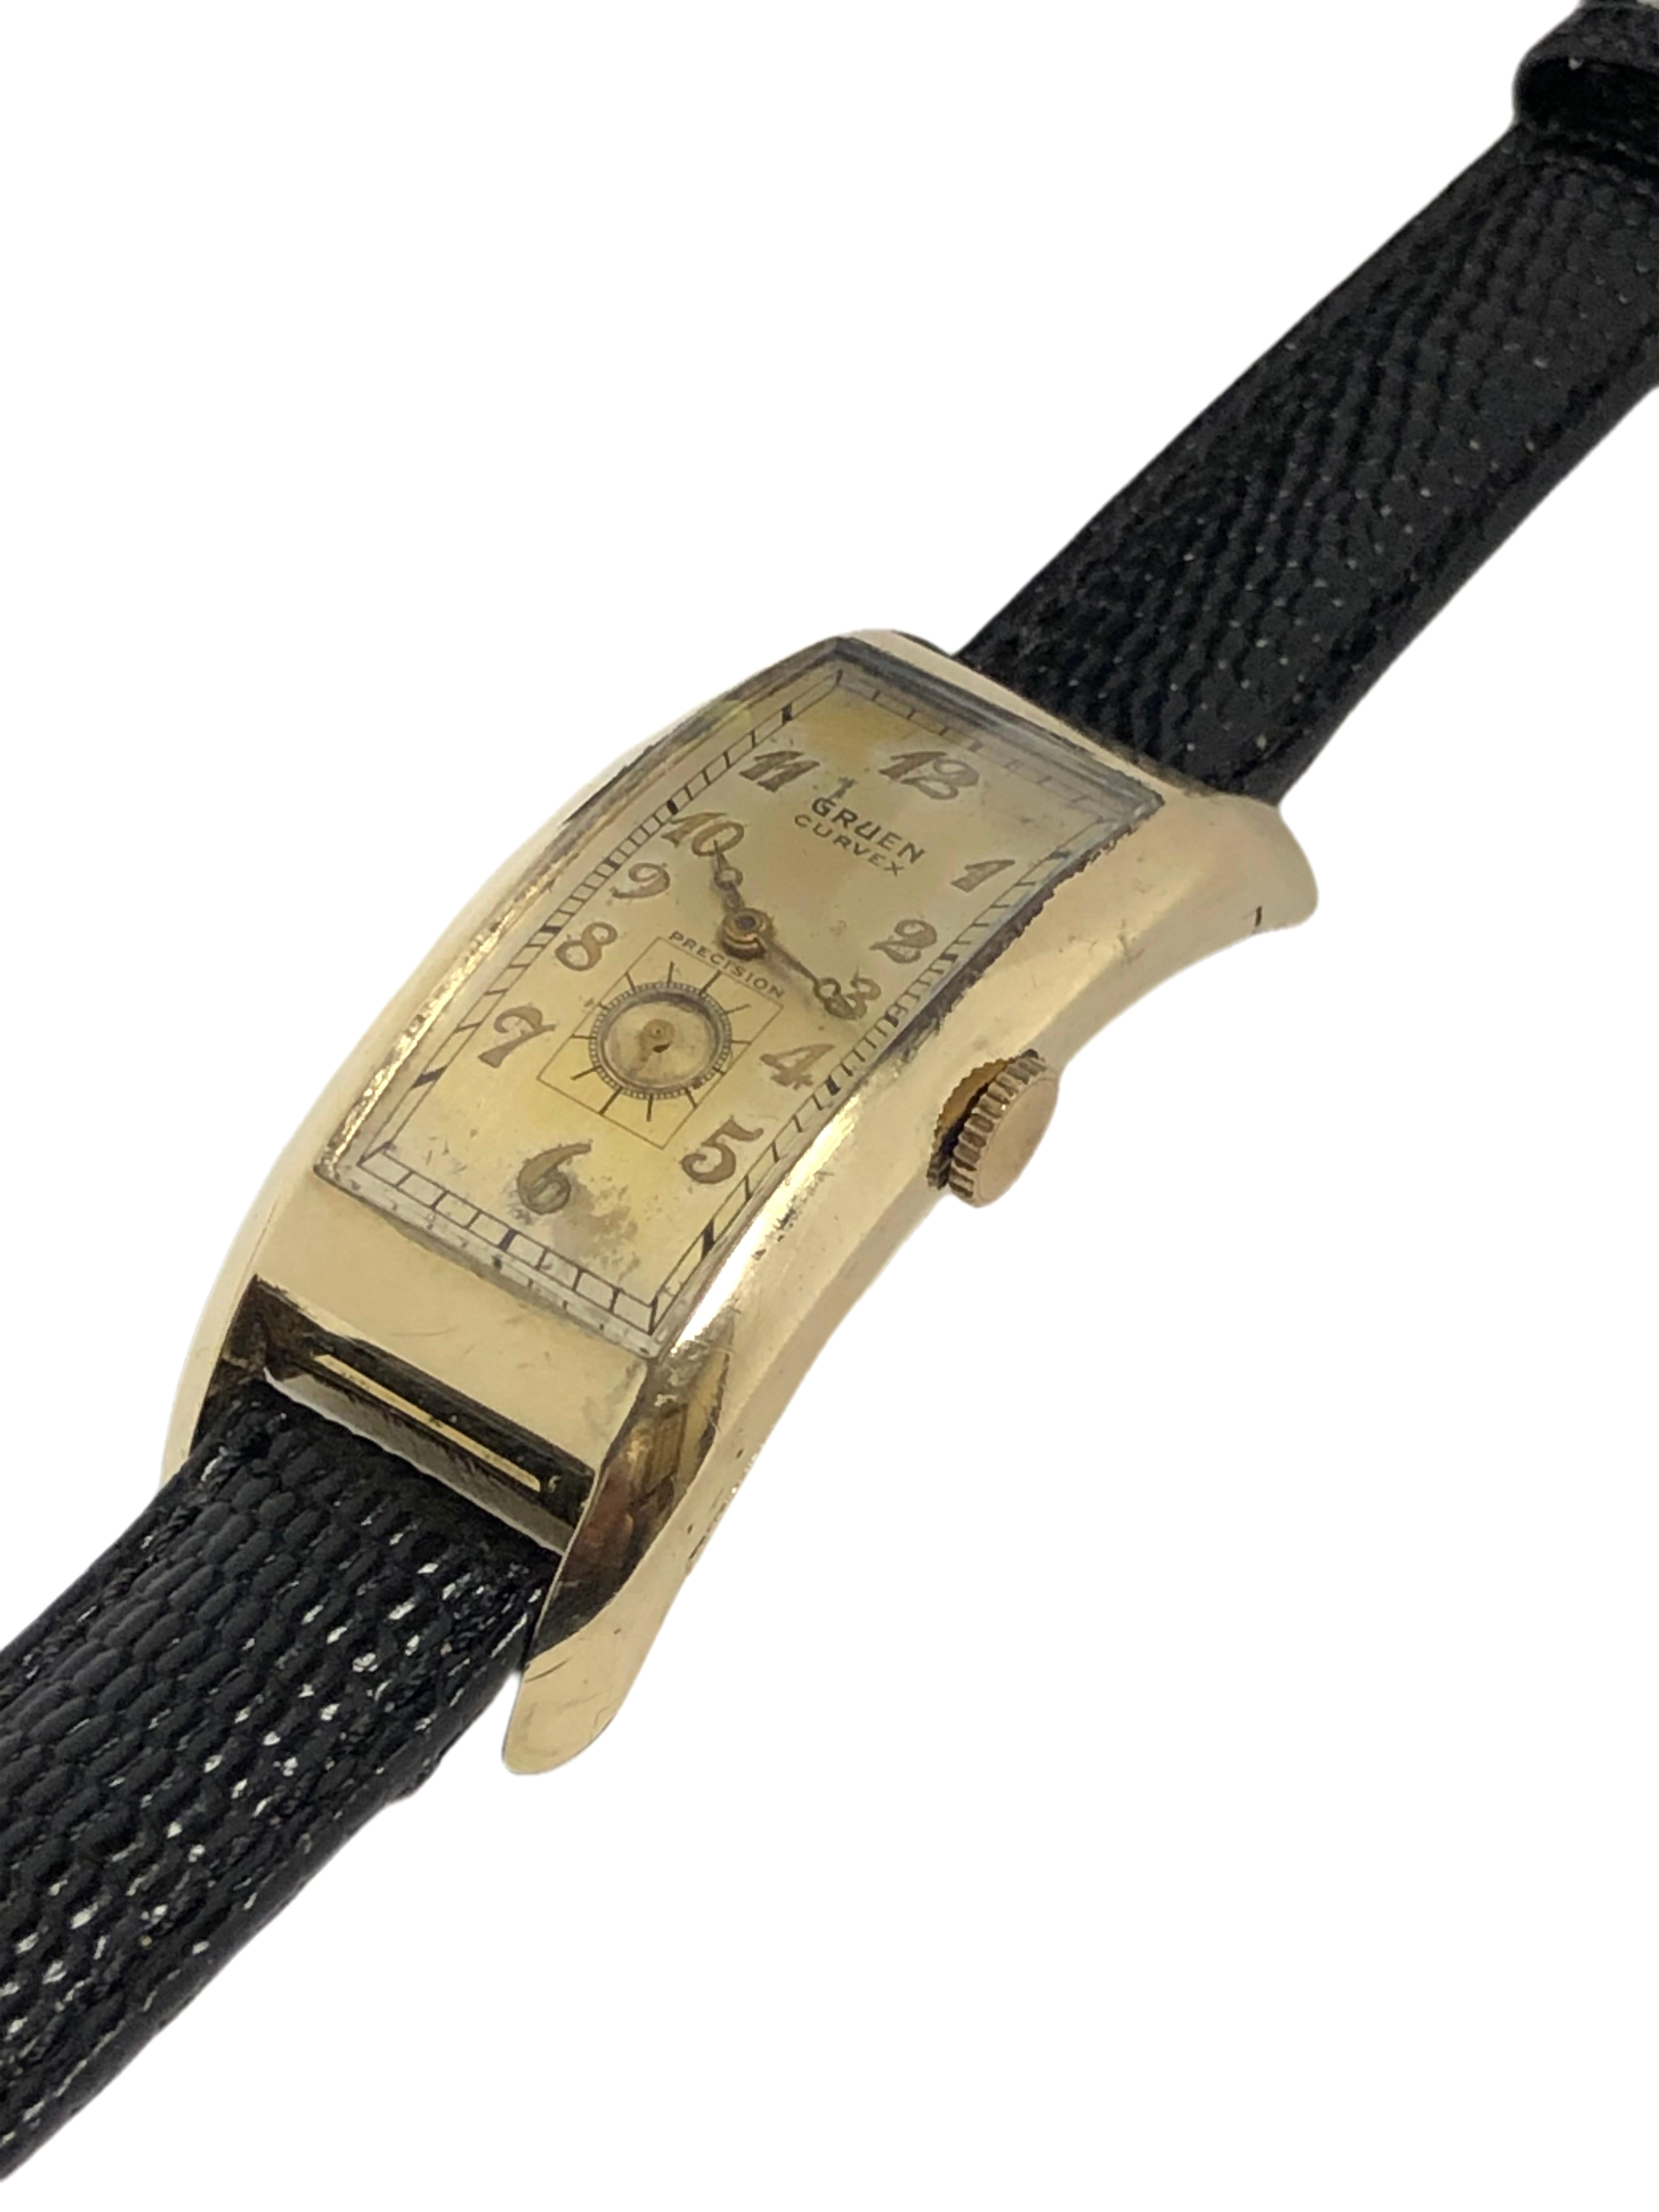 Circa 1939 Gruen Curvex Majesty Wrist Watch, 52 M.M. extreme curved Yellow Gold Filled 2 Piece case. Caliber 330 Manual wind movement, original silvered dial with raised markers and a sub seconds hand. The face shows some fading but is a very good